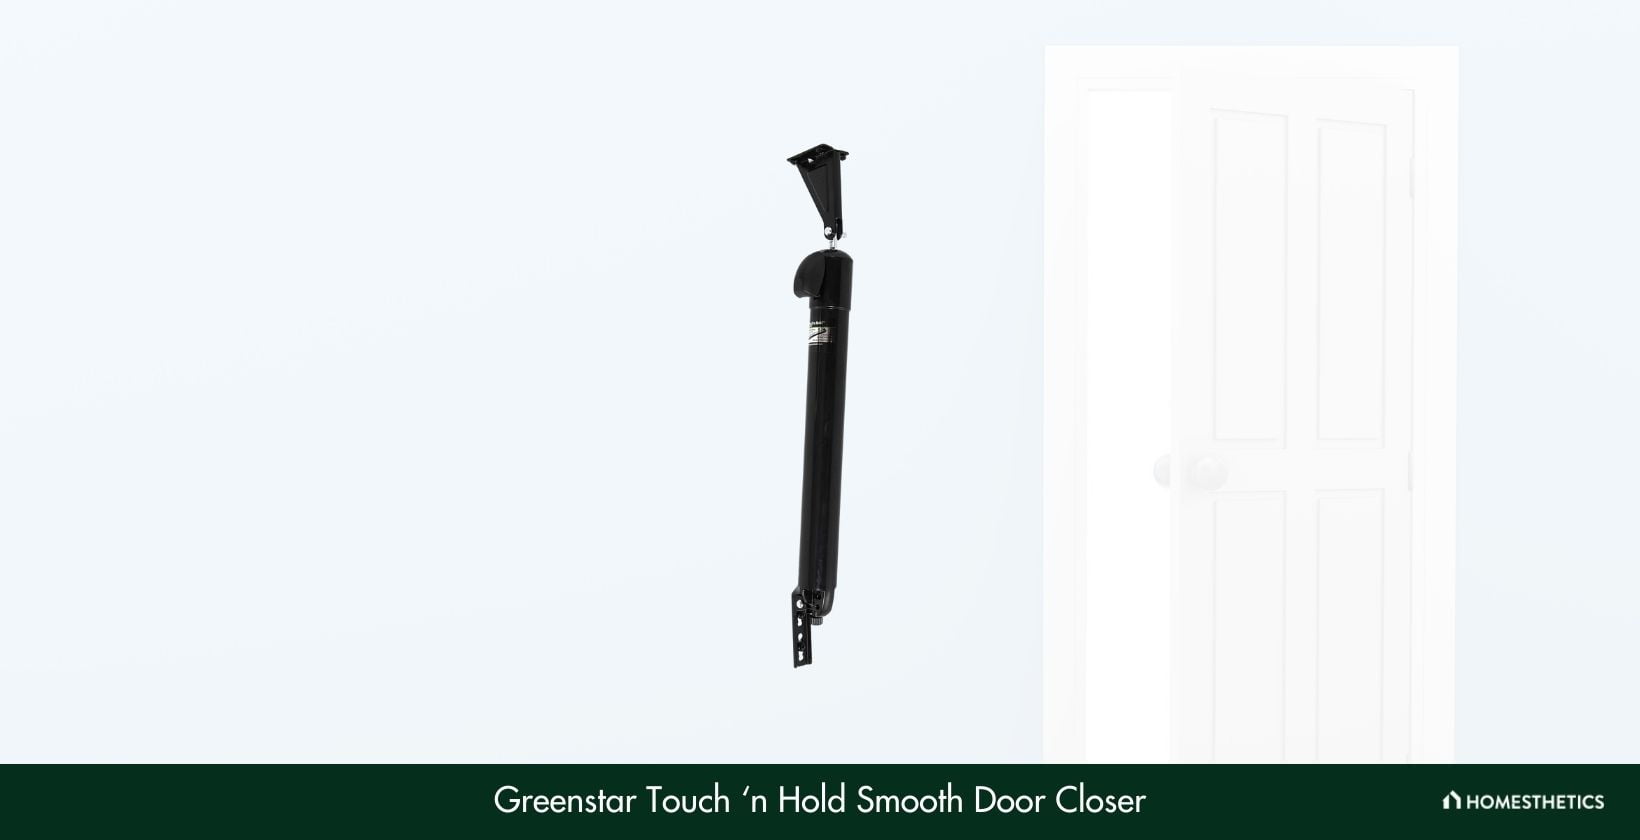 Greenstar Touch ‘n Hold Smooth Door Closer